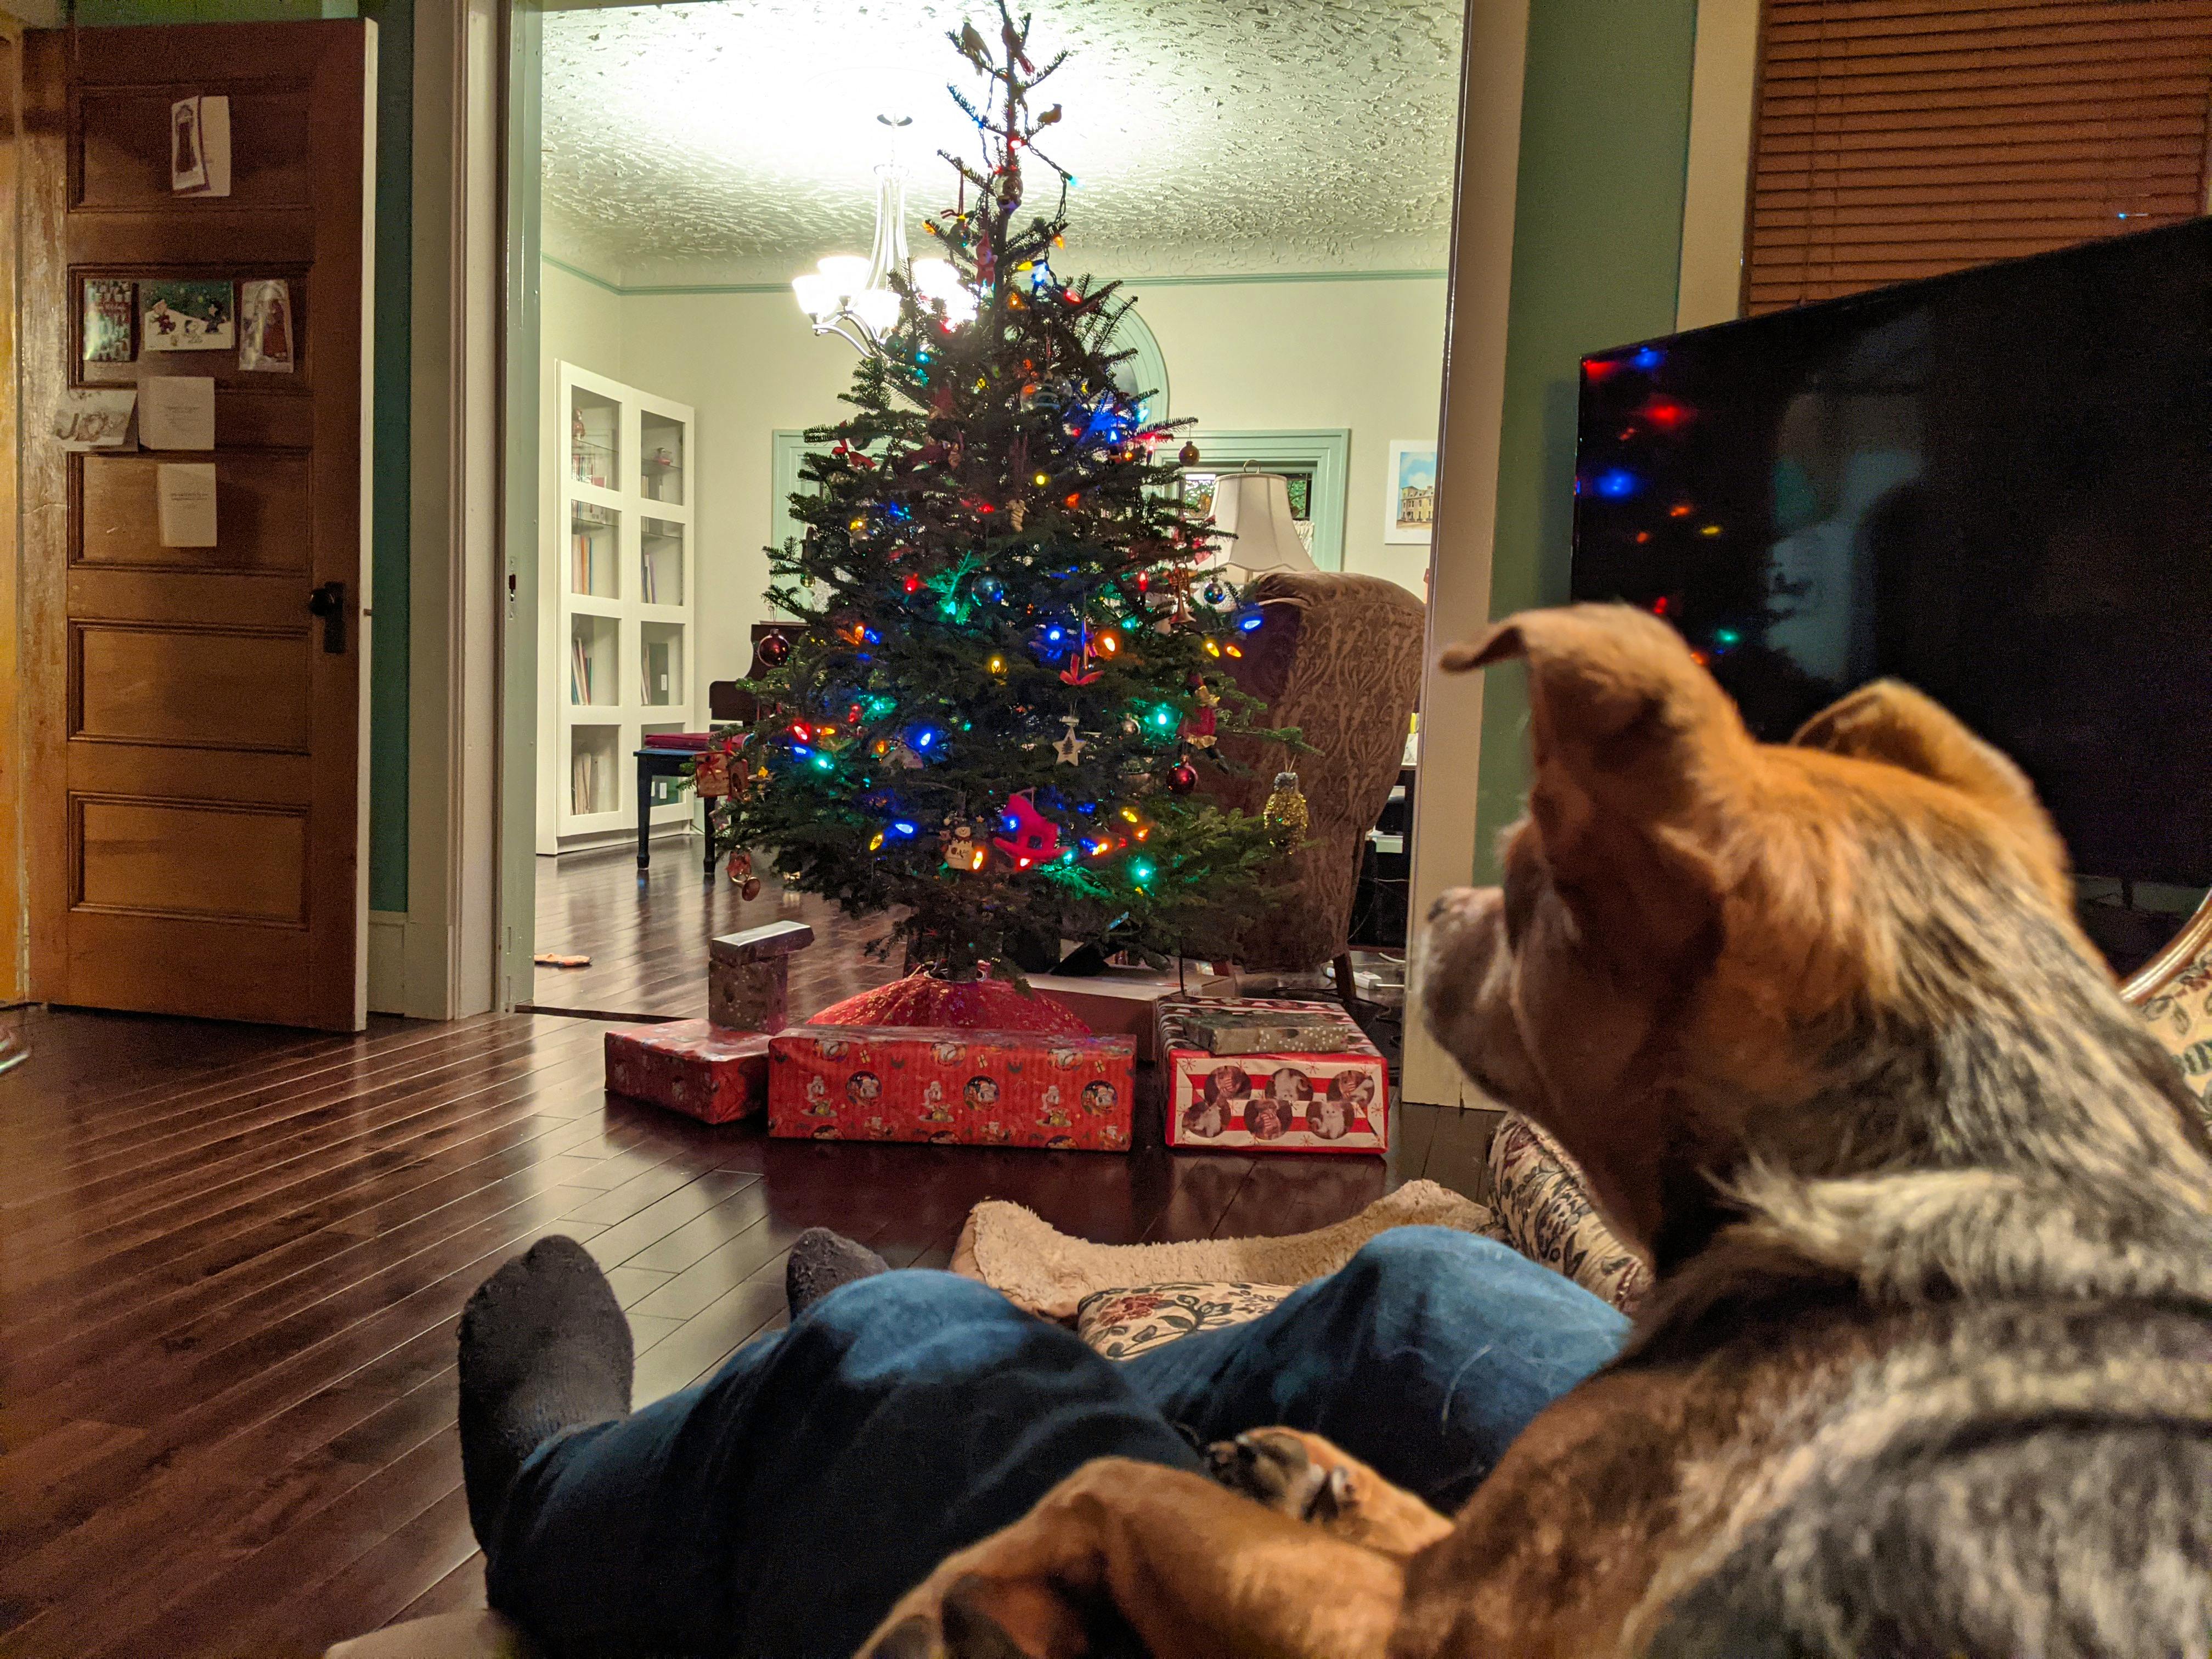 "Here's my dog, Zoe, looking at our Christmas tree while sitting on my nephew Corey's knee. We just moved from Ontario to Aylesford in November. Corey is a student at King's College in Halifax, N.S., and was able to spend the holidays with us. He took the photo.
Cheers, Christine Sharp. "